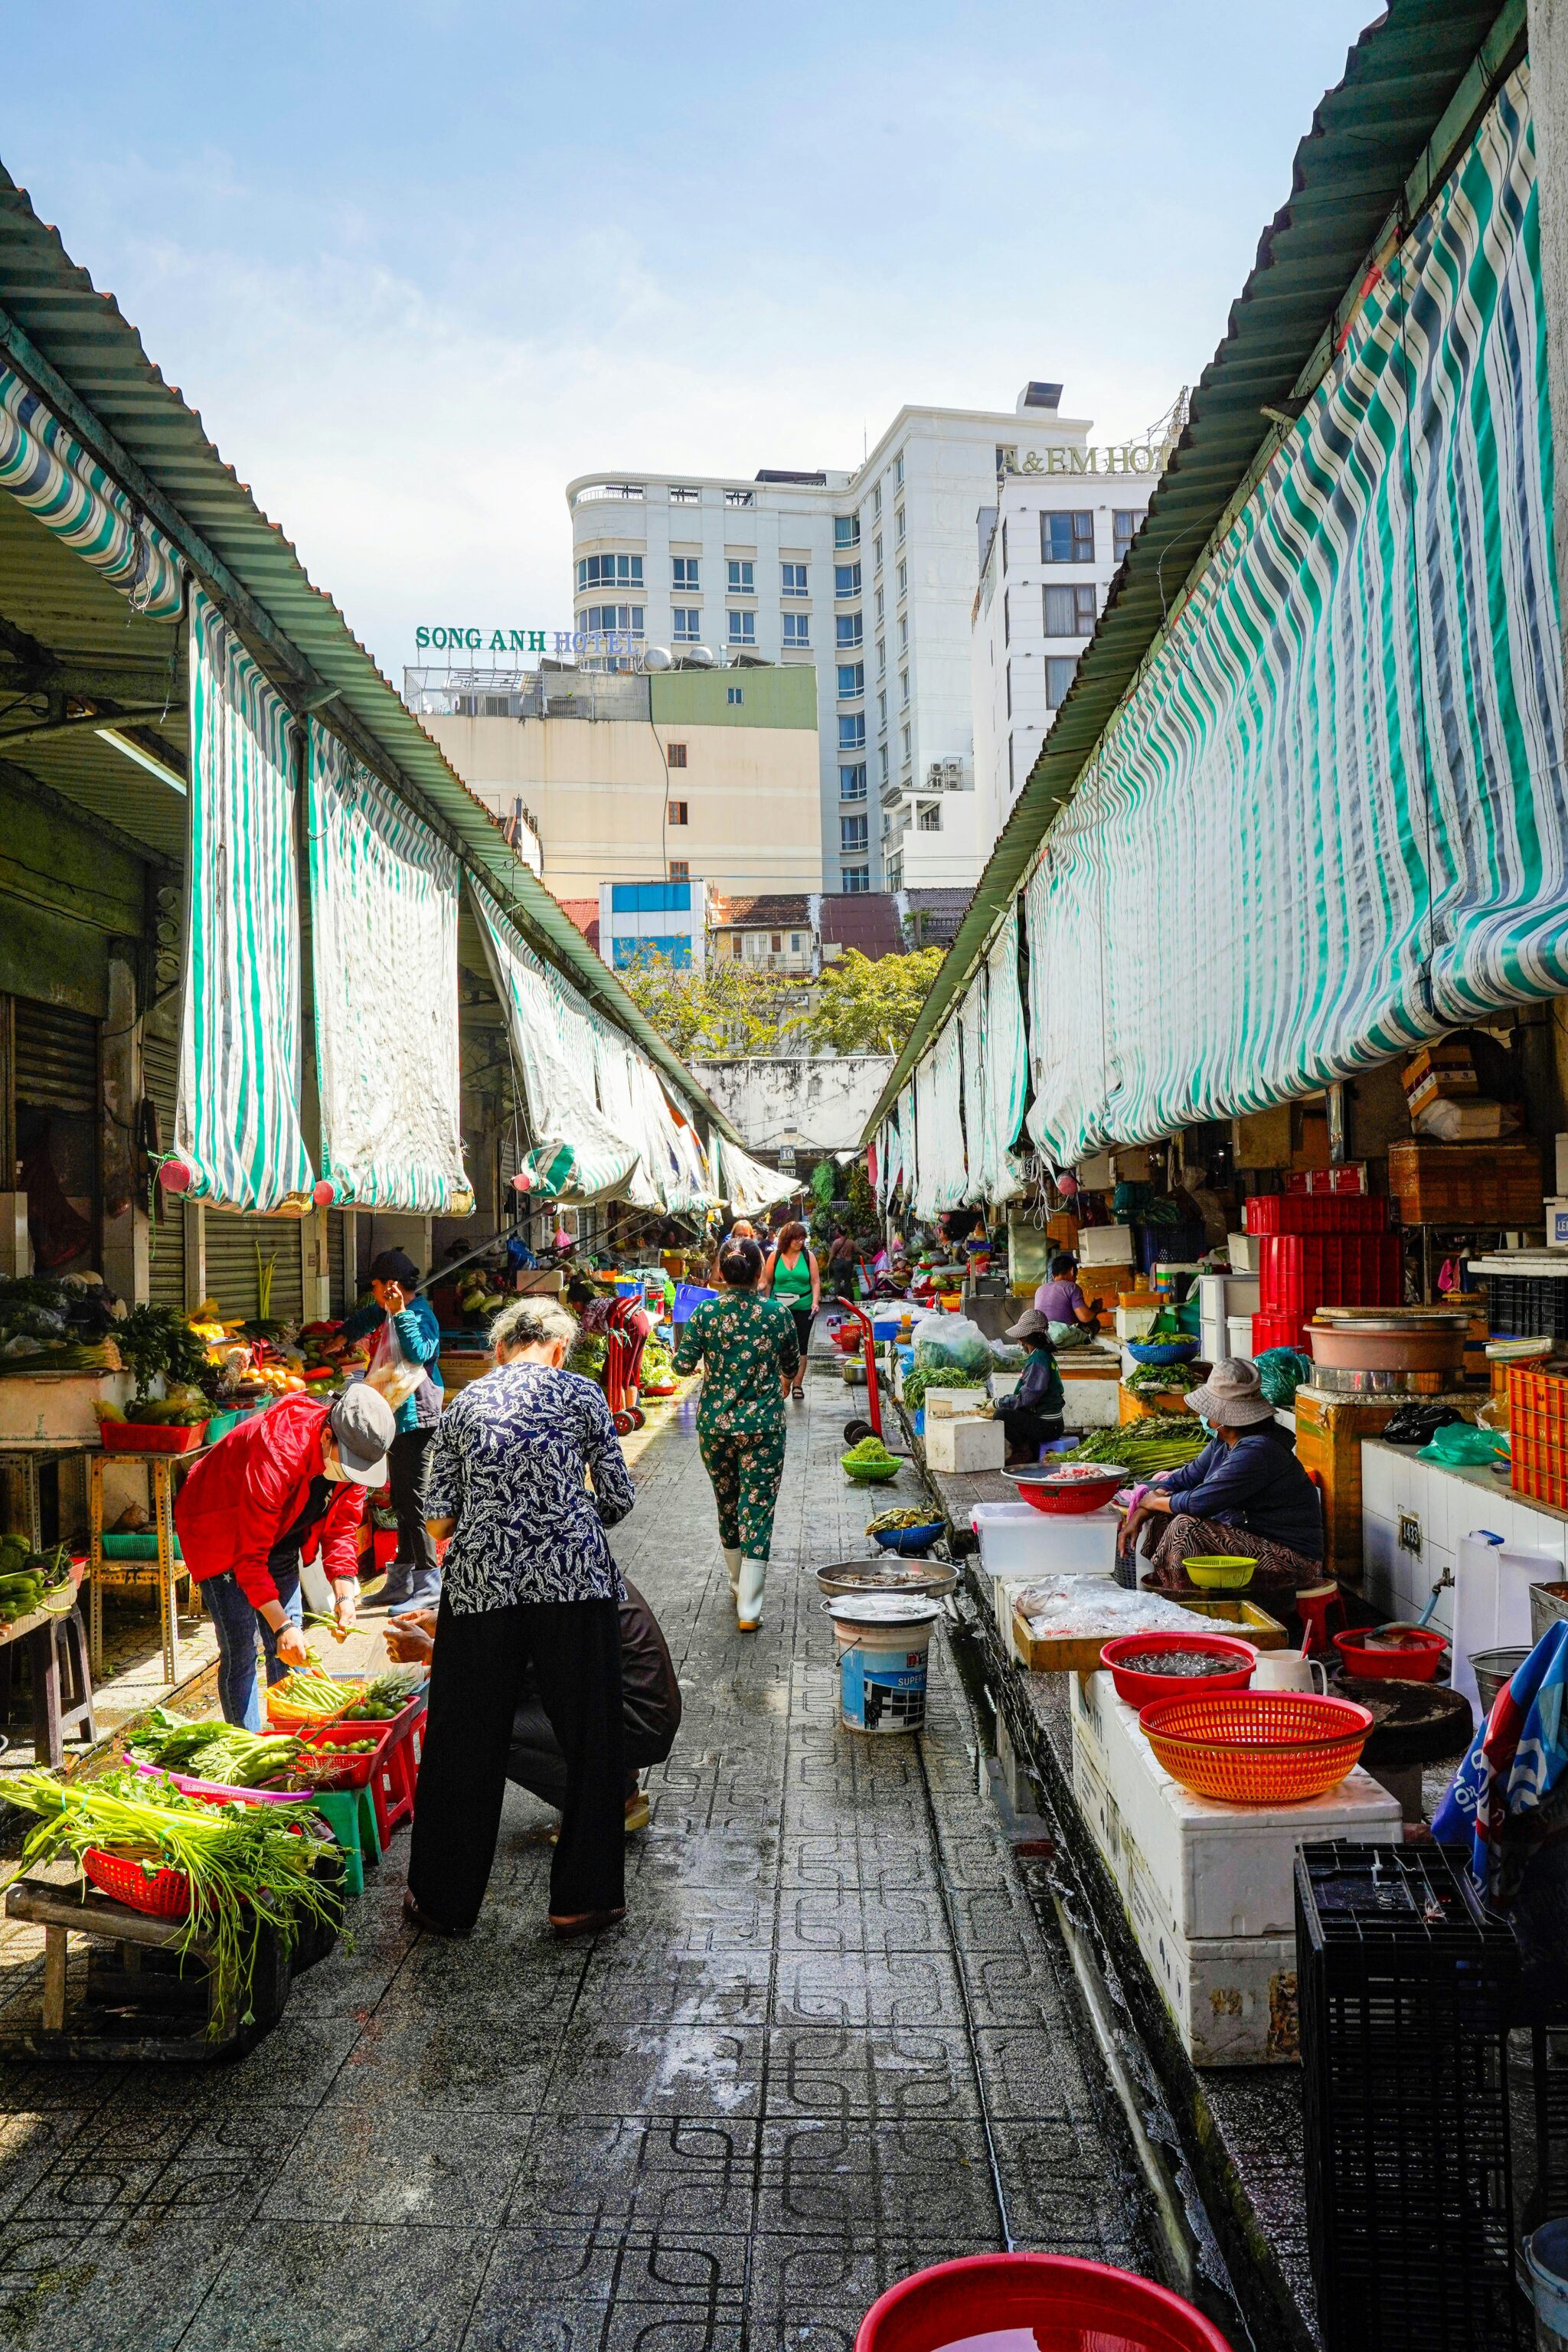 The daily life of Ben Thanh Market seller